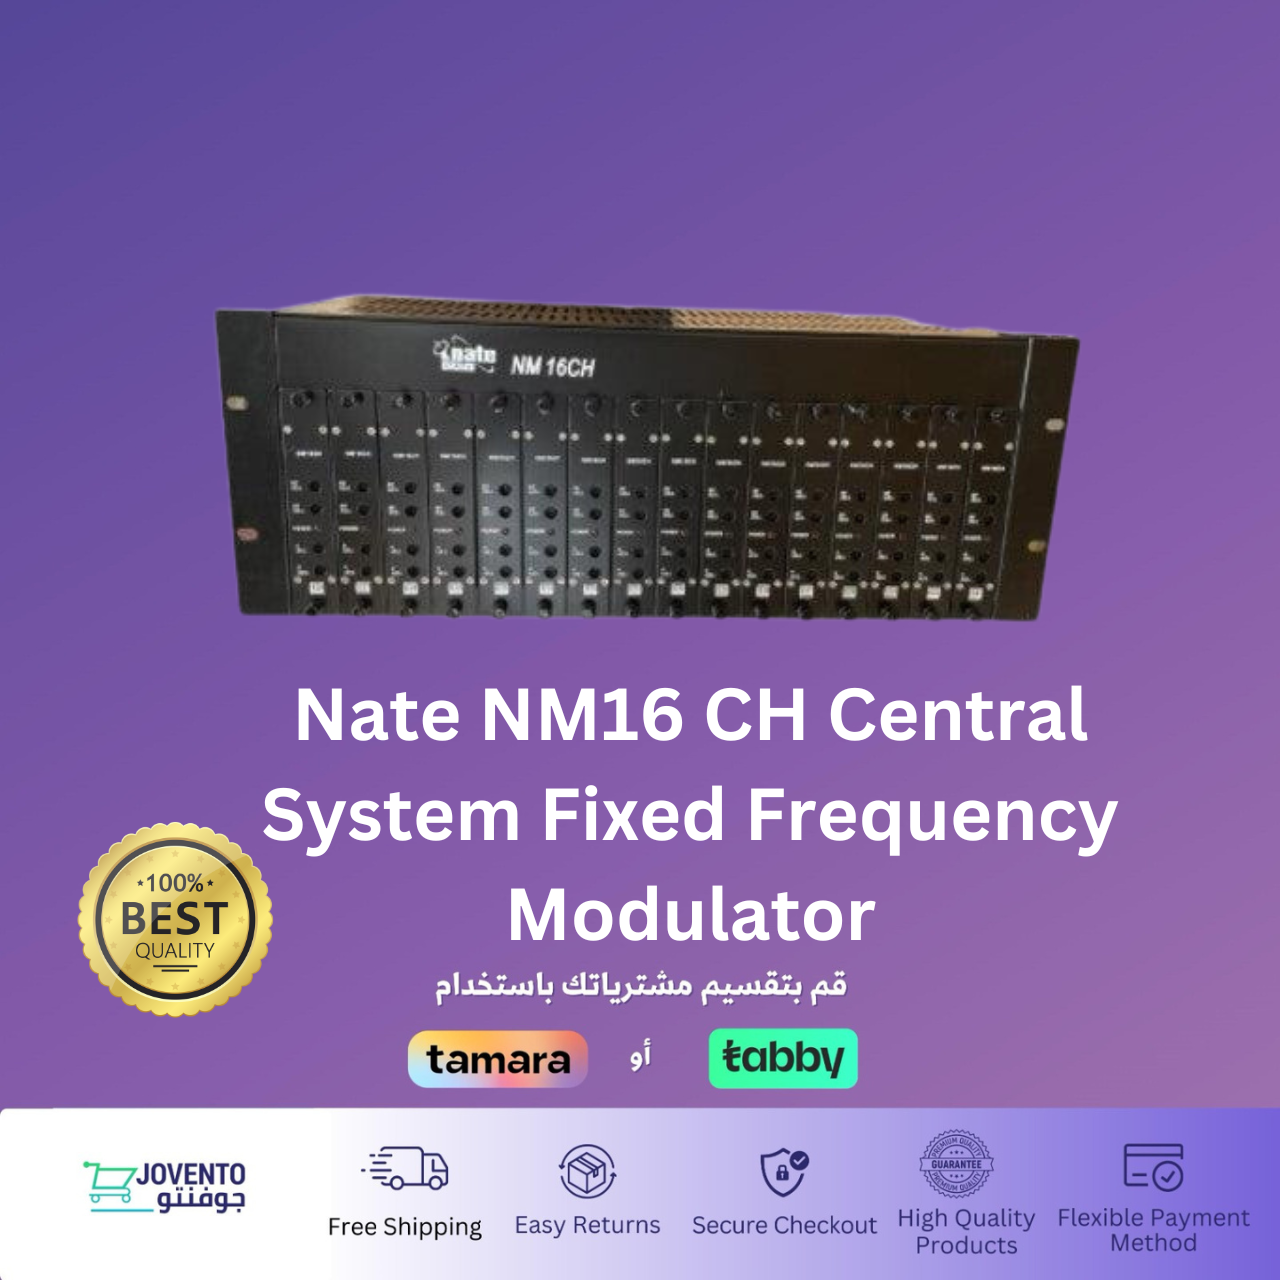 Nate NM16 CH Central System Fixed Frequency Modulator